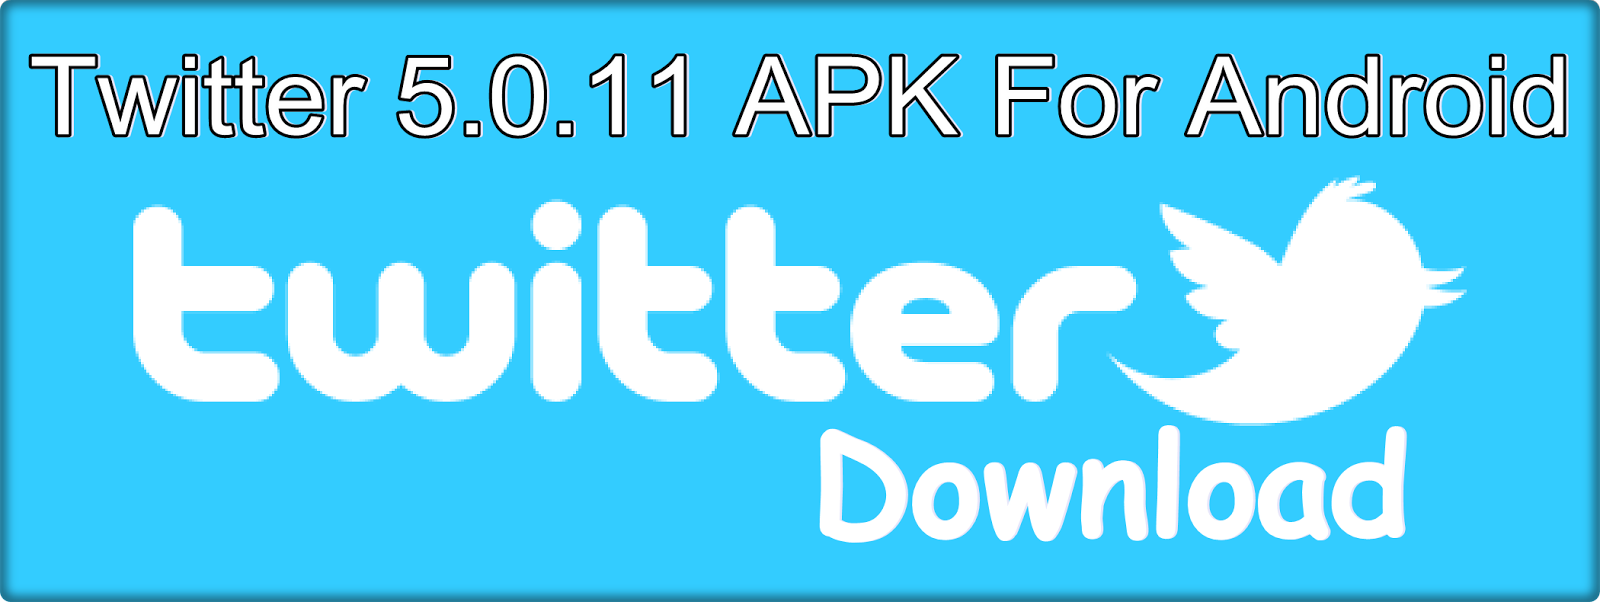 Download Twitter 5.0.11 APK For Android (Latest Version)